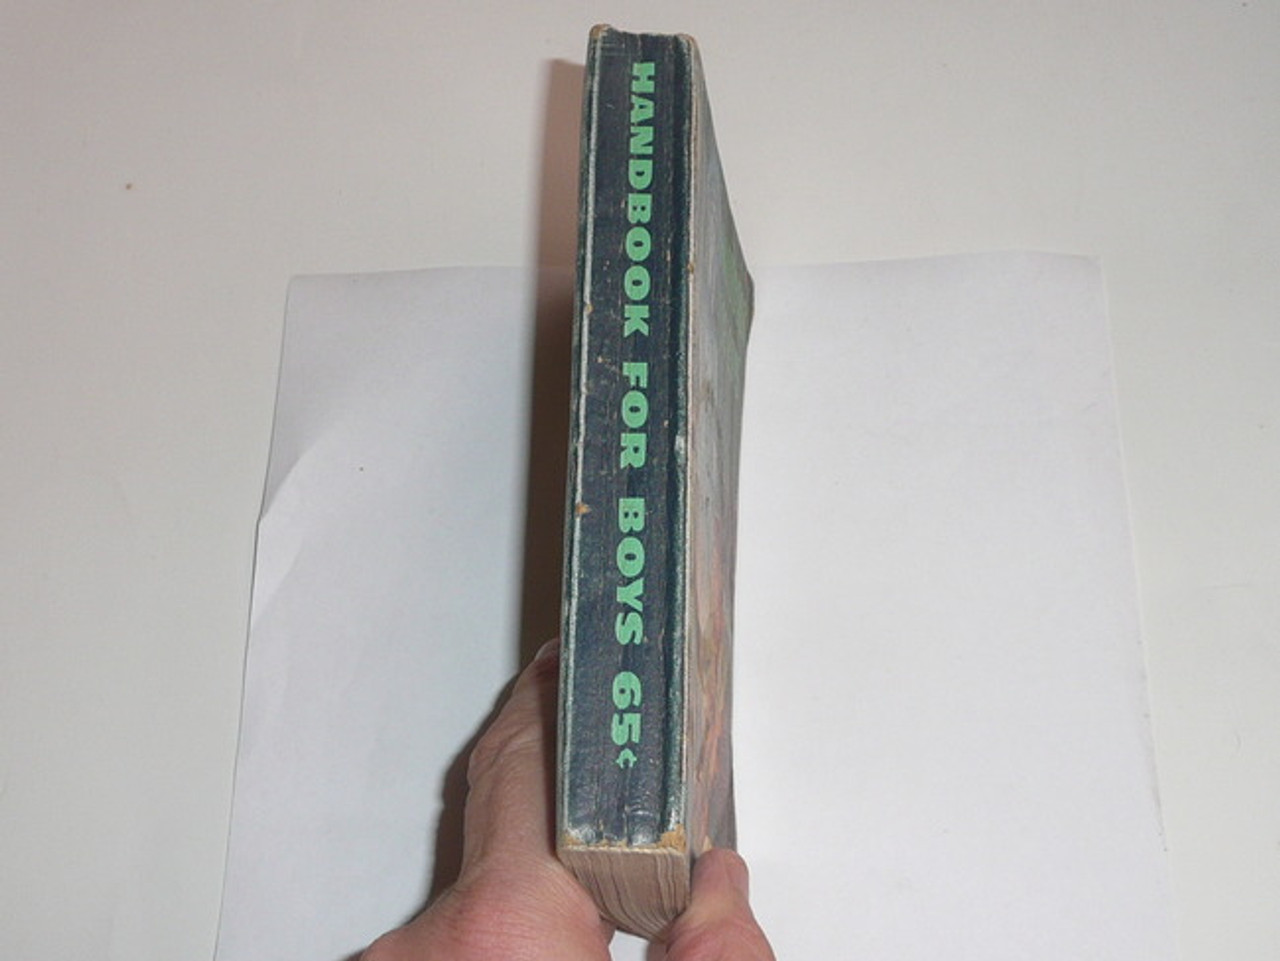 1957 Boy Scout Handbook, Fifth Edition, Tenth Printing, Used condition